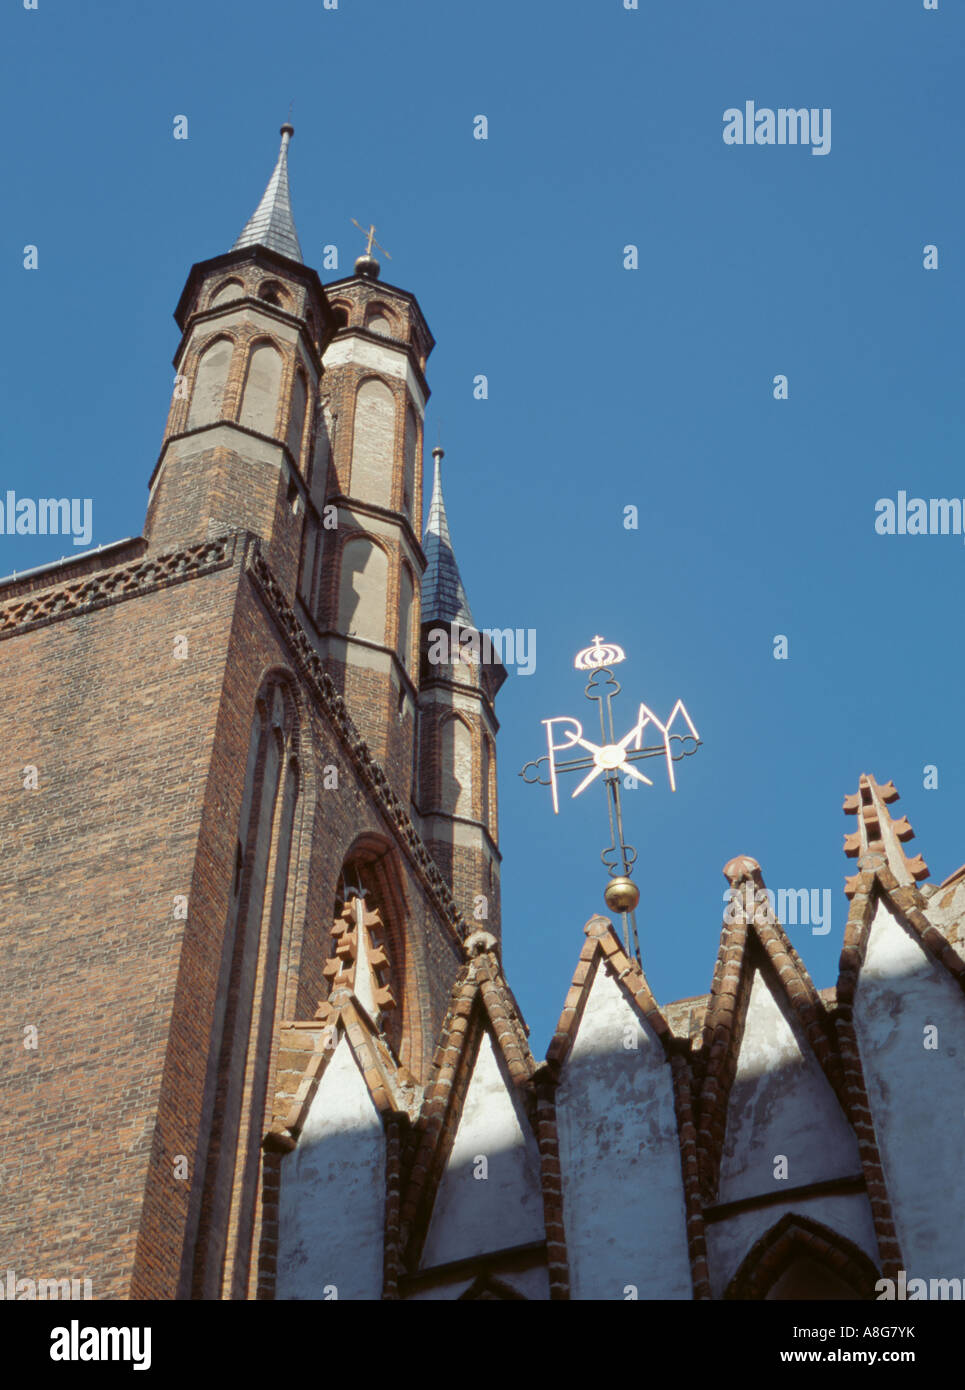 Pax sign and spires of the Church of the Assumption of Our Lady, or St Mary's Church, Torun, Pomerania, Poland. Stock Photo